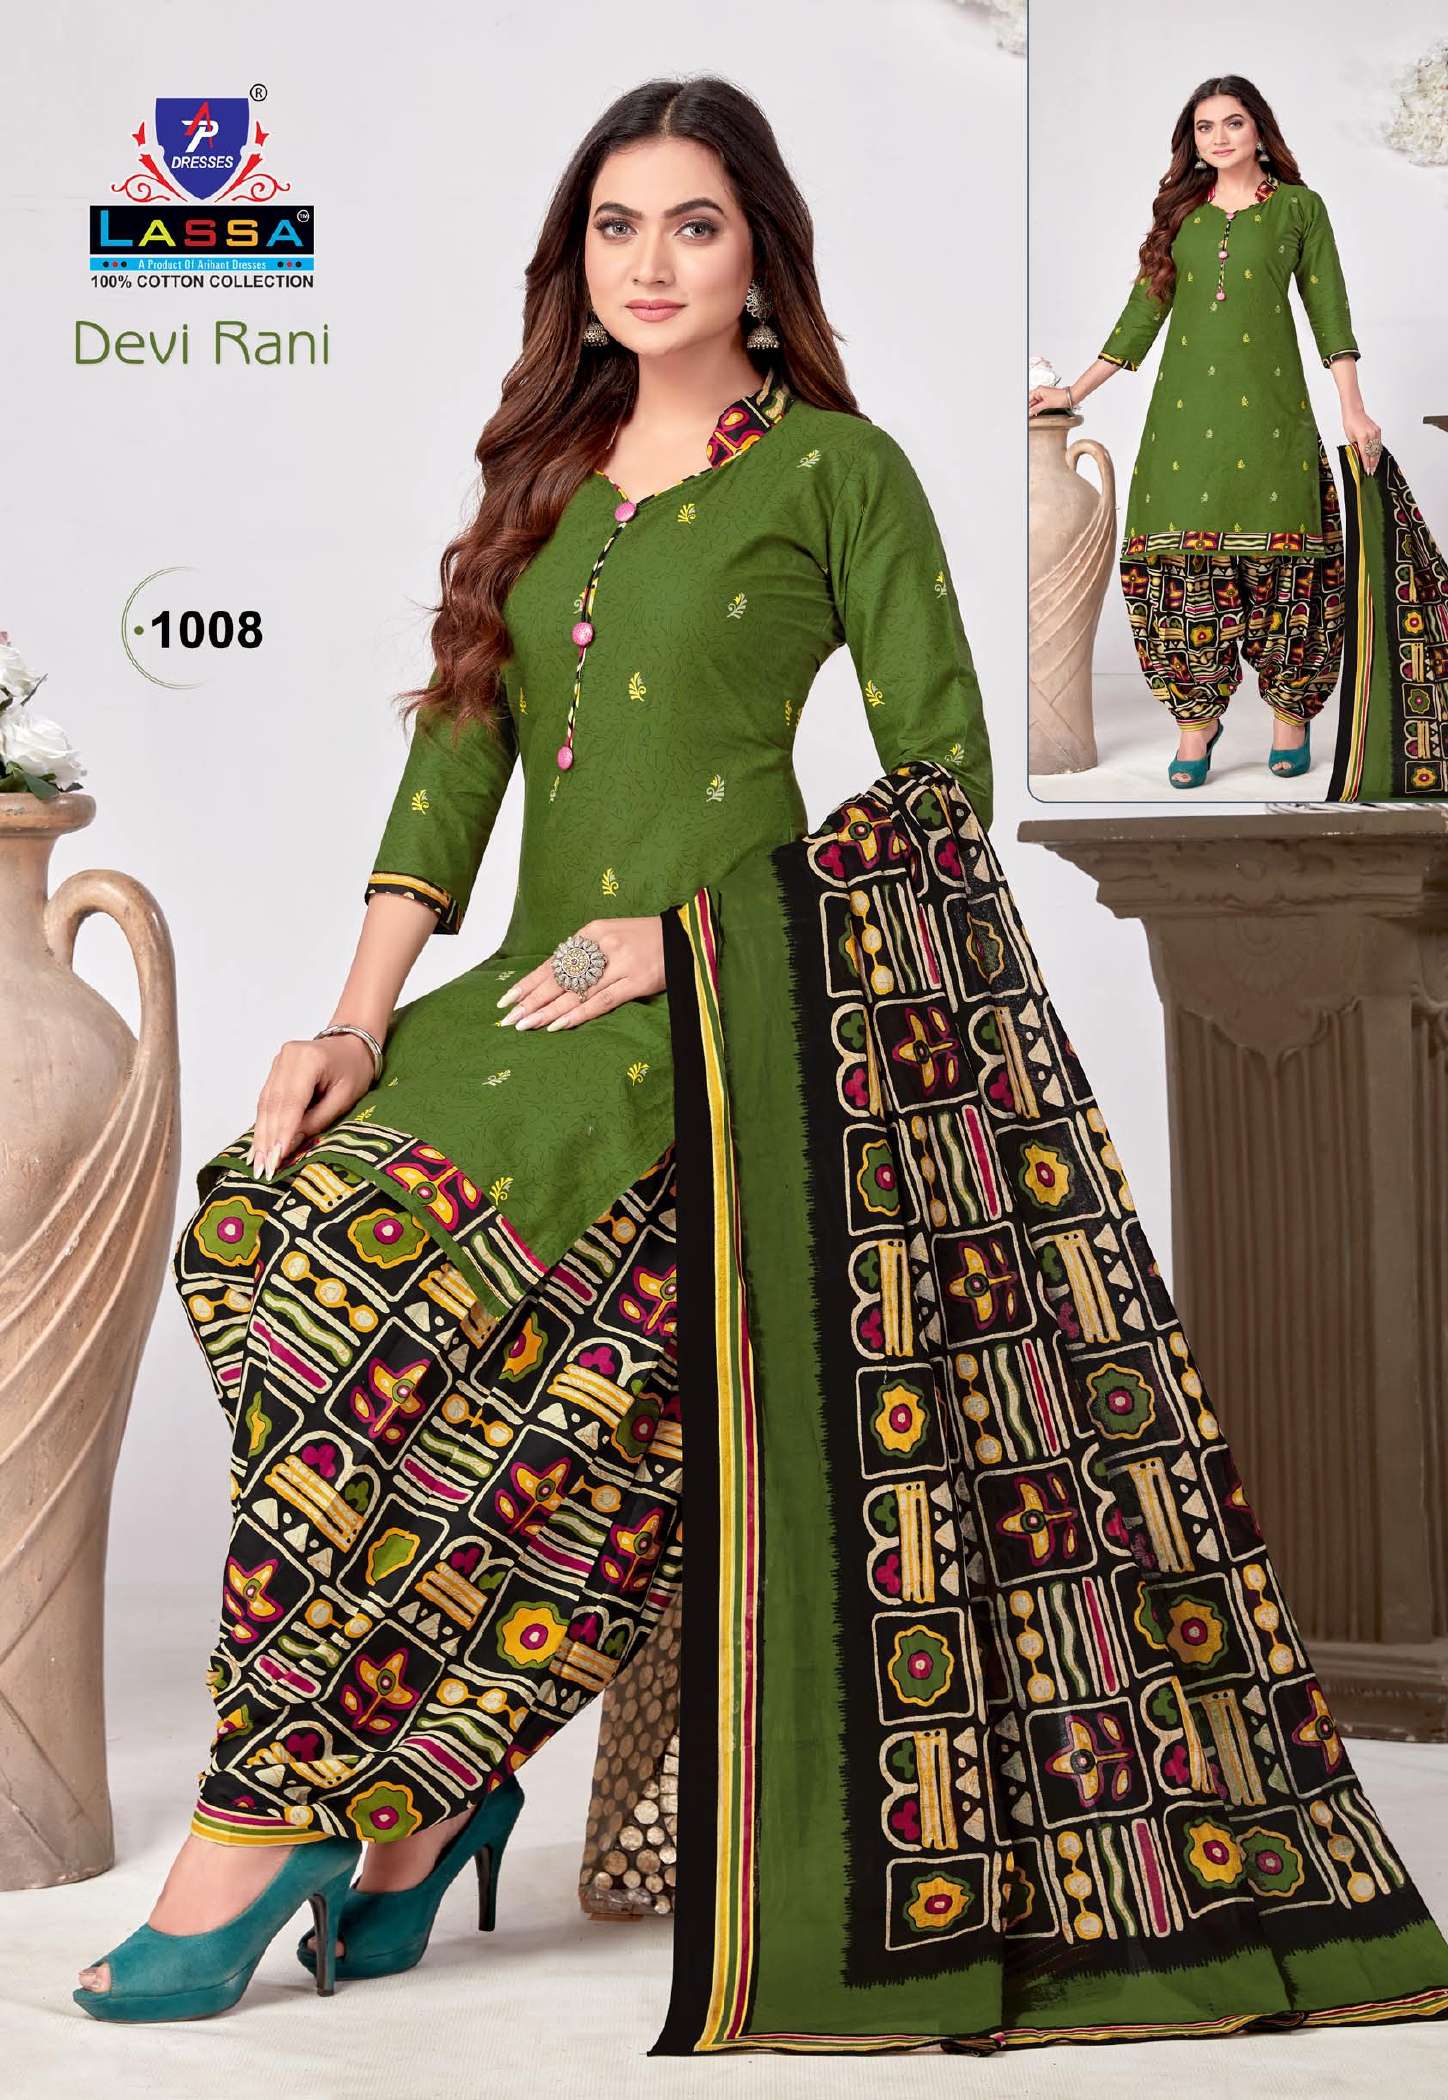 Devi Rani Vol-1 By Lassa 1001 To 1010 Series Beautiful Festive Suits Colorful Stylish Fancy Casual Wear & Ethnic Wear Pure Cotton Print Dresses At Wholesale Price